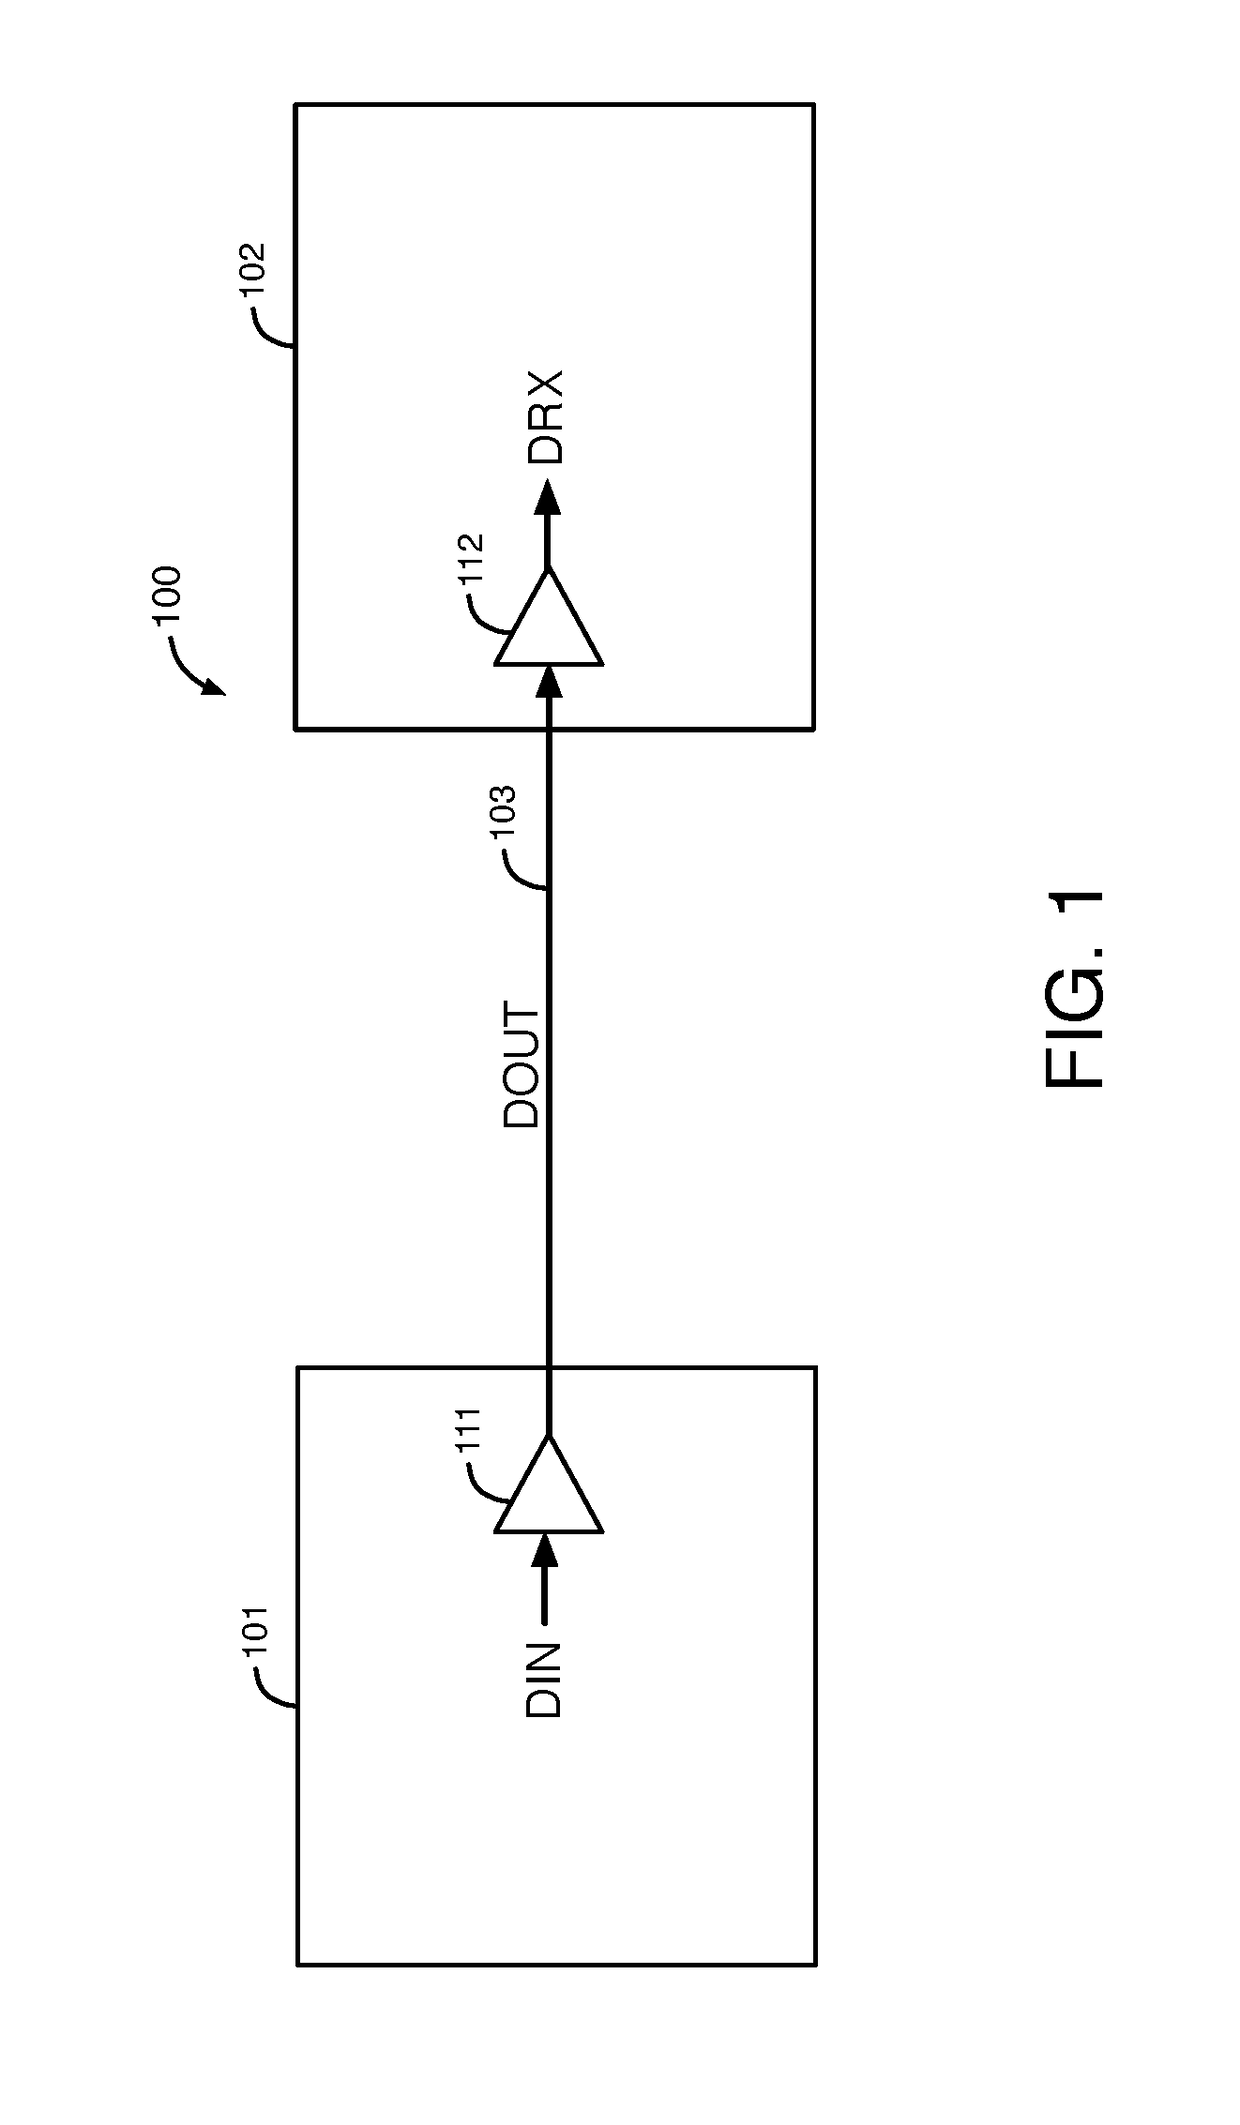 Circuits and methods for impedance calibration